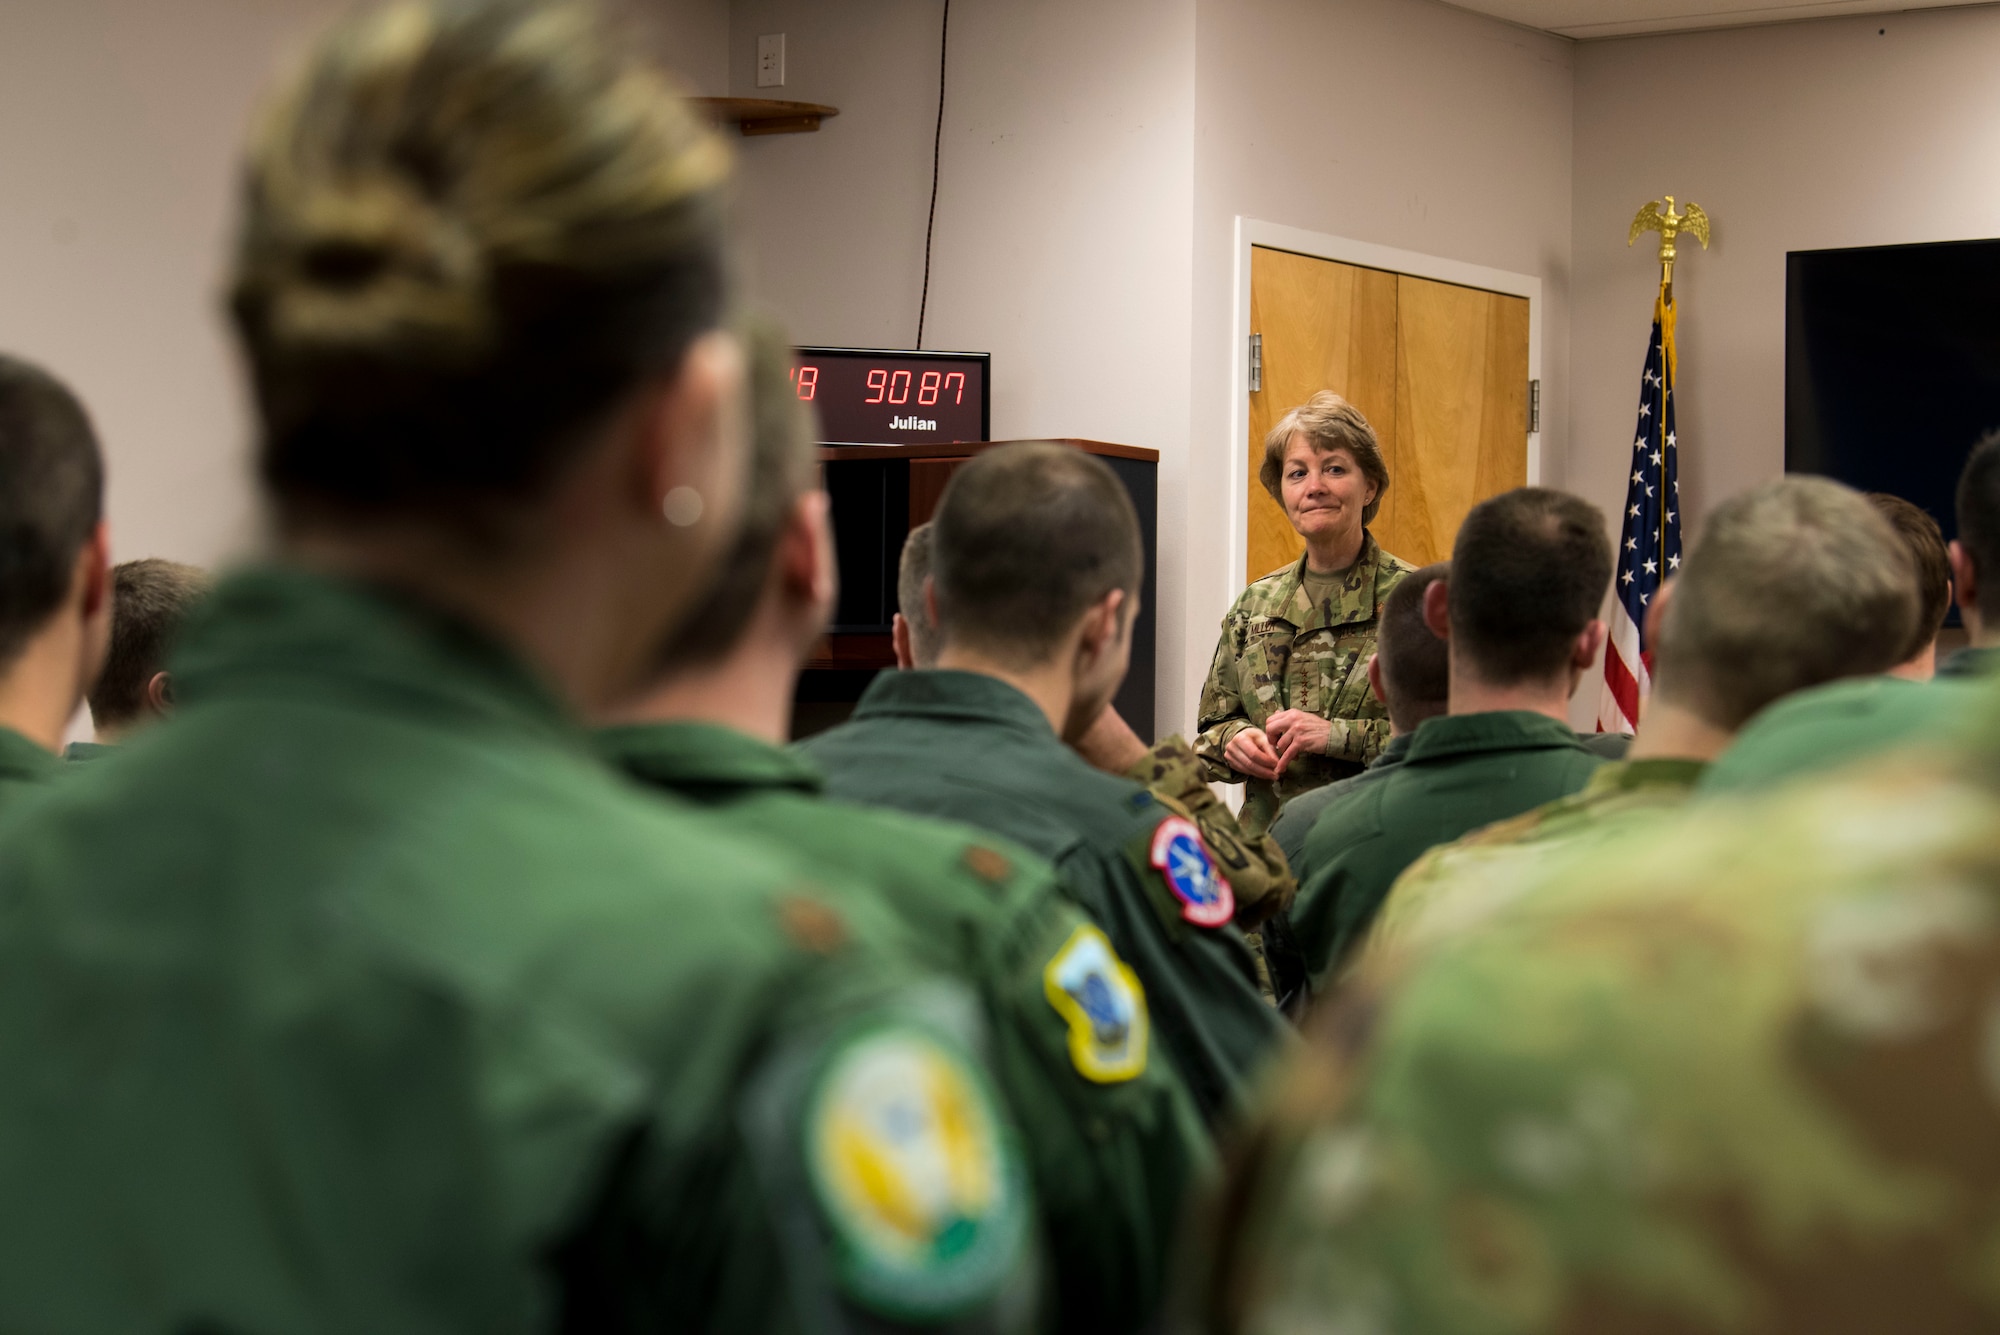 U.S. Air Force Gen. Maryanne Miller, Air Mobility Command commander, holds an open discussion with pilots at Fairchild Air Force Base, Washington, March 28, 2019. During Miller’s visit, she emphasized the importance of developing and preparing Airmen at all levels to face both current and future challenges. (U.S. Air Force photo by Airman 1st Class Lawrence Sena)